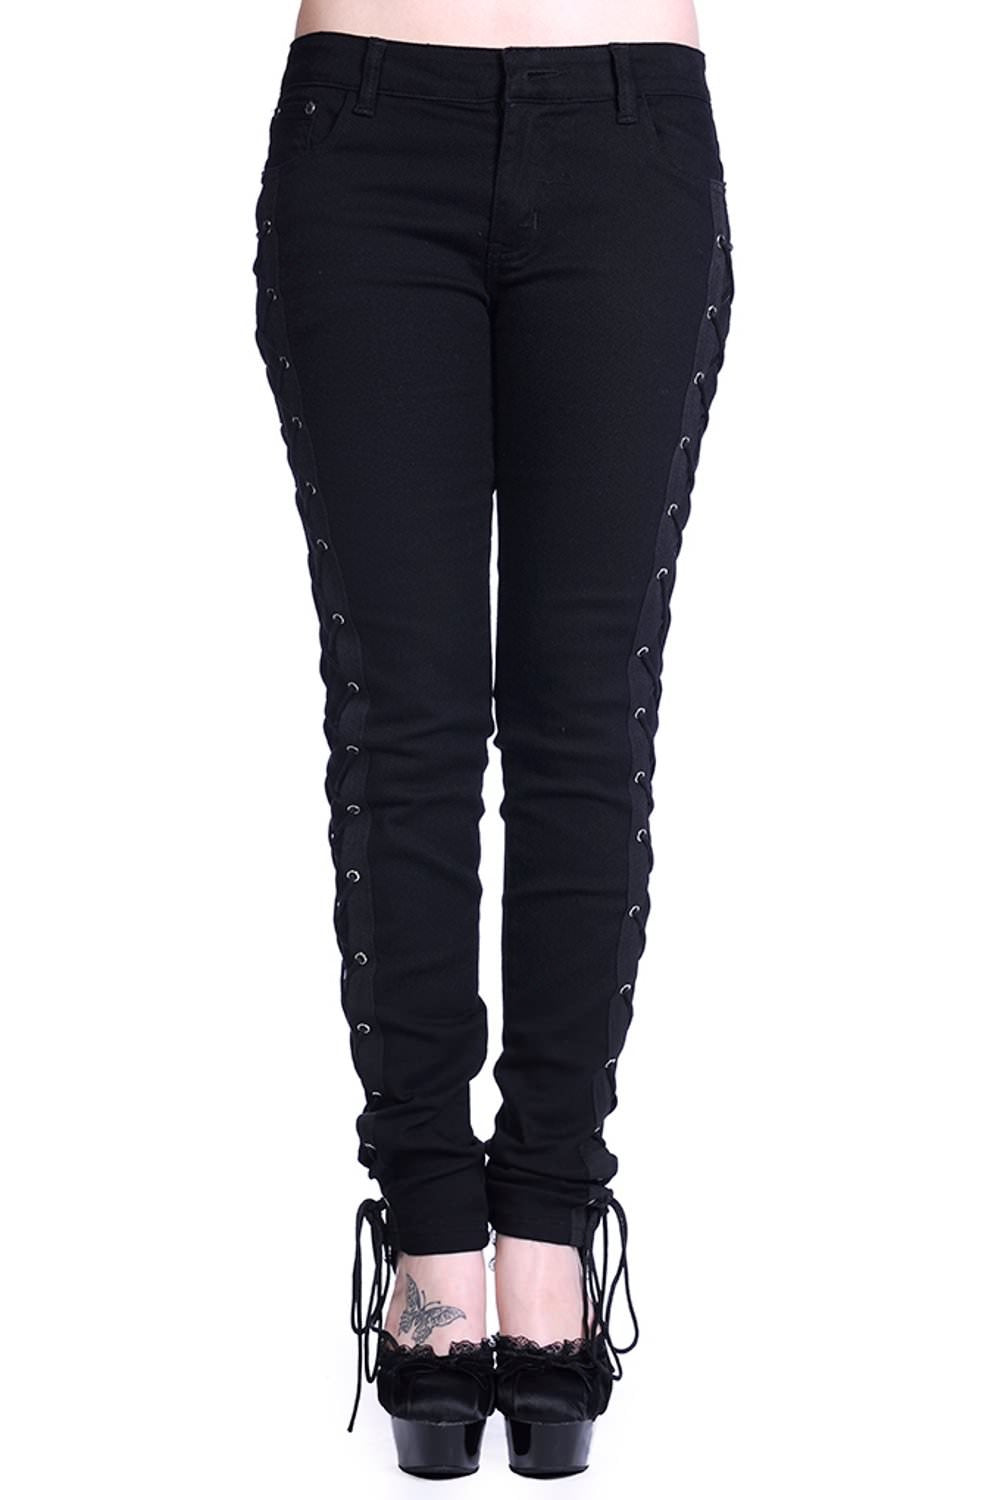 Low rise black trousers with corset details on the side of leg